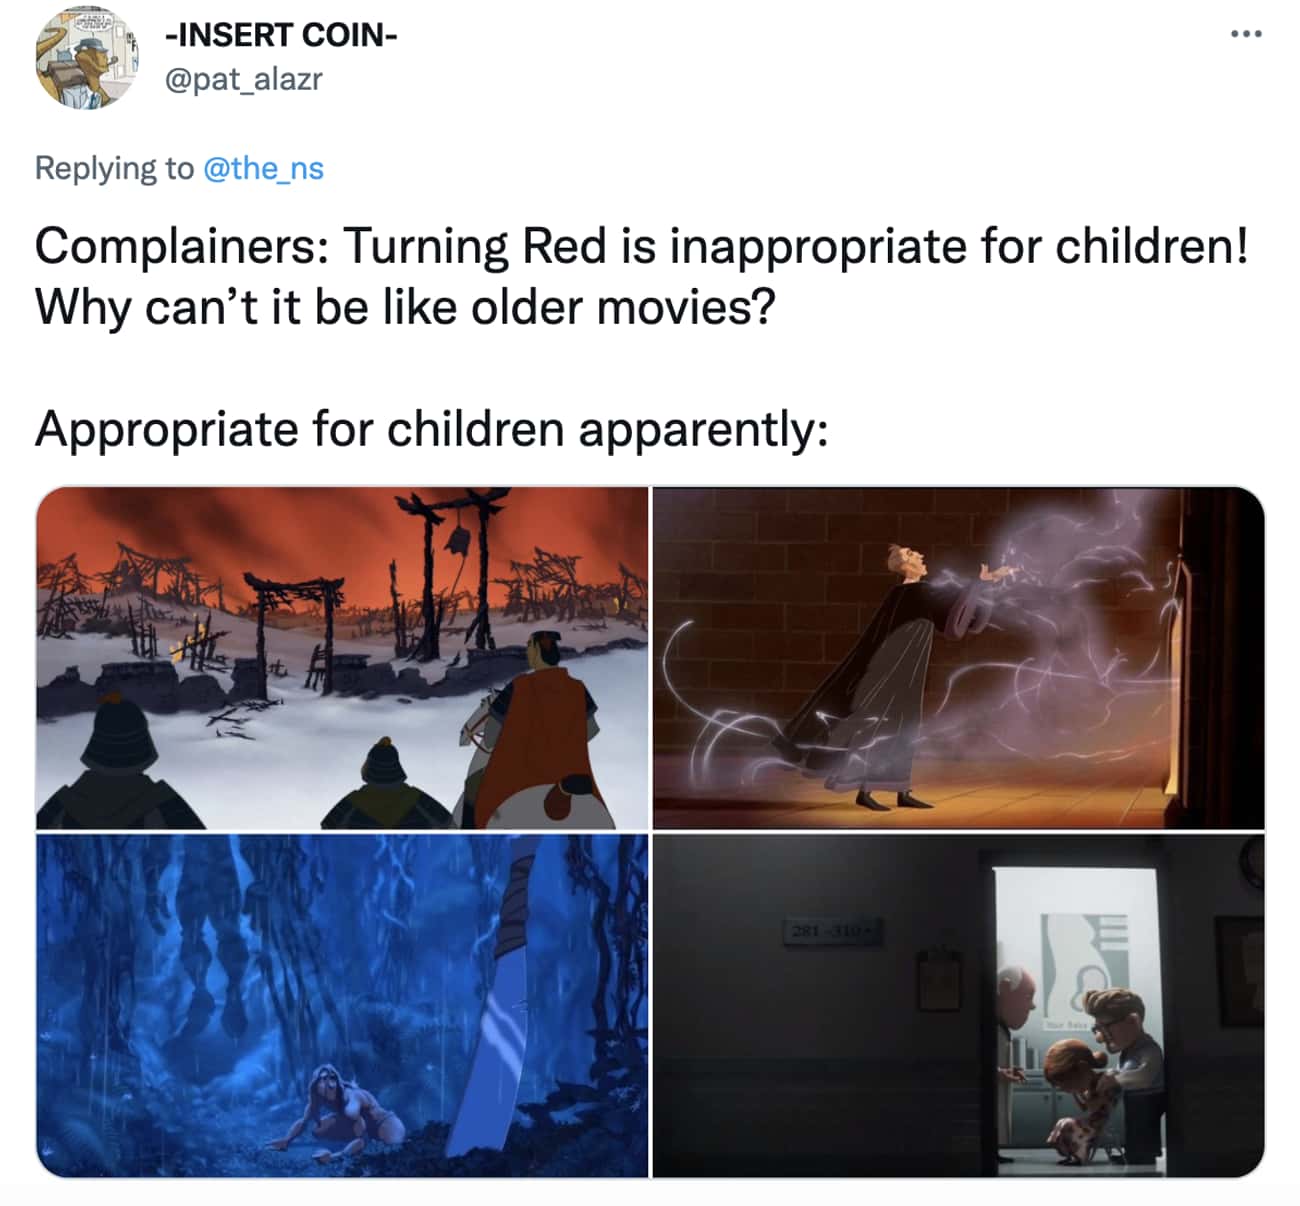 Ending The "Inappropriate For Children" Debate